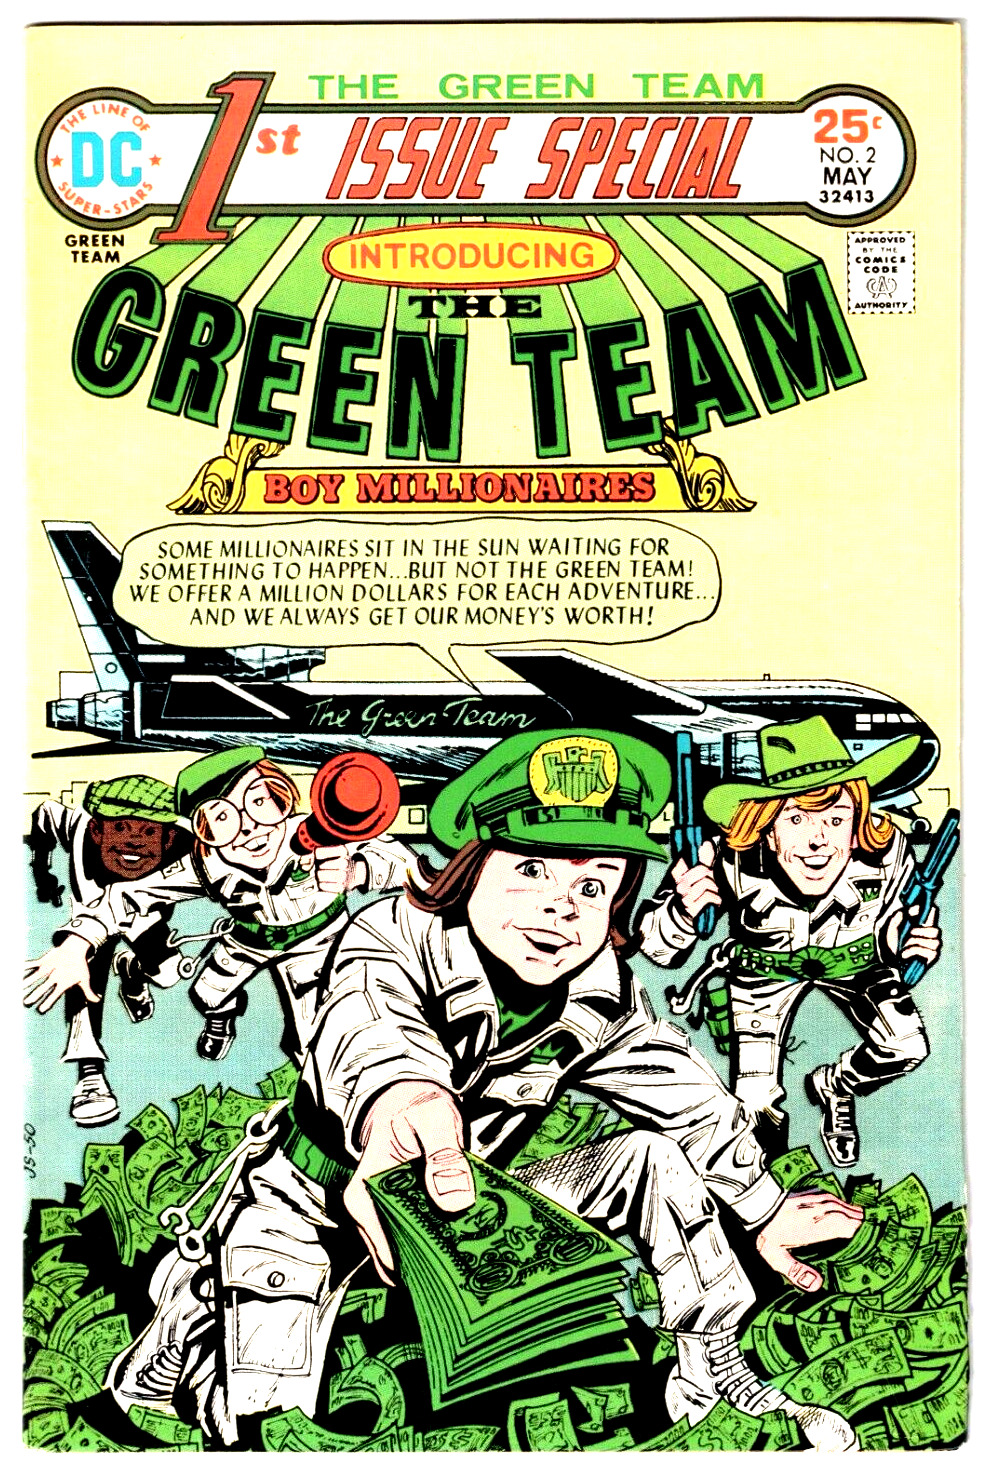 1ST ISSUE SPECIAL #2 (VF/NM) 1st GREEN TEAM Appearance! Joe Simon Story! DC 1975